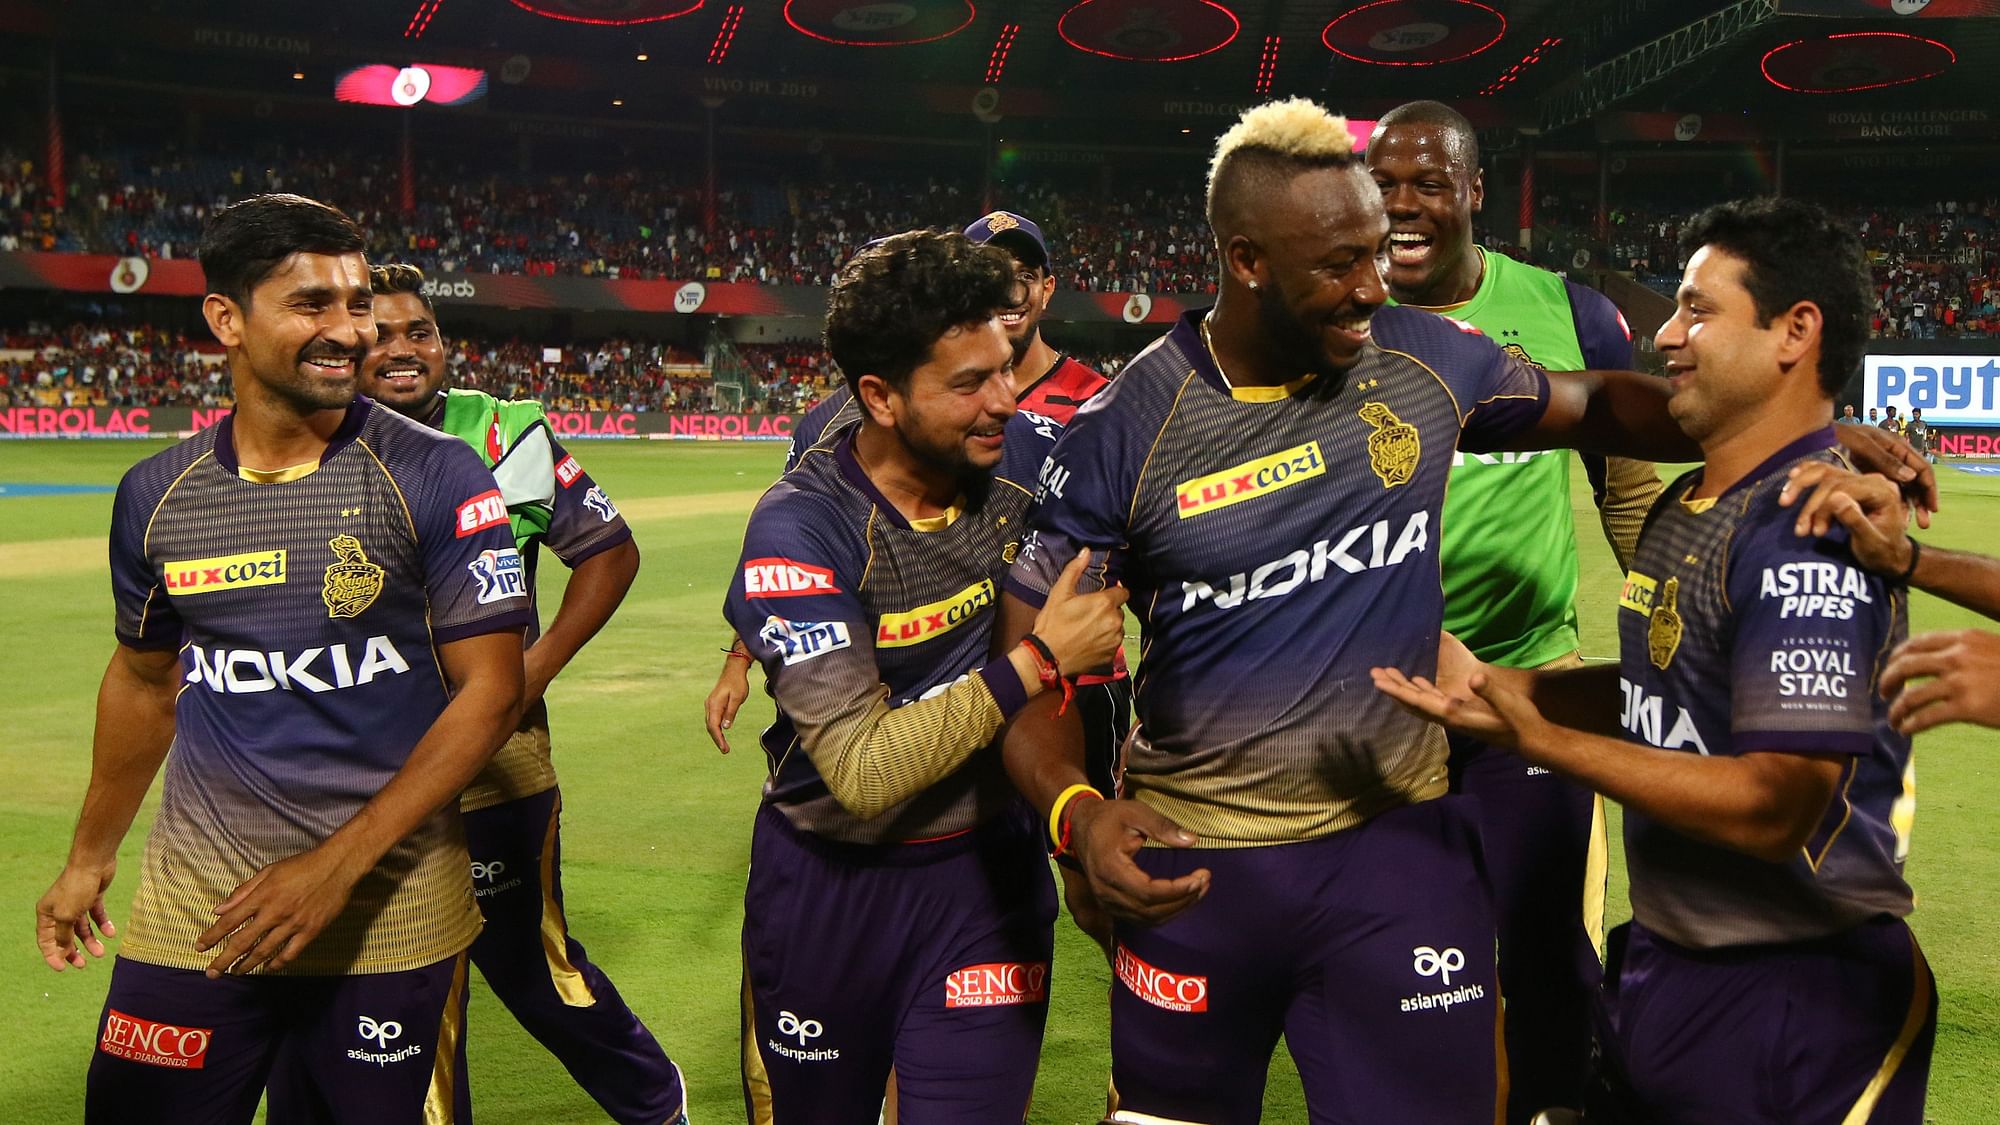 The result means KKR have now won three out of their four games while RCB are have lost five in a row.&nbsp;